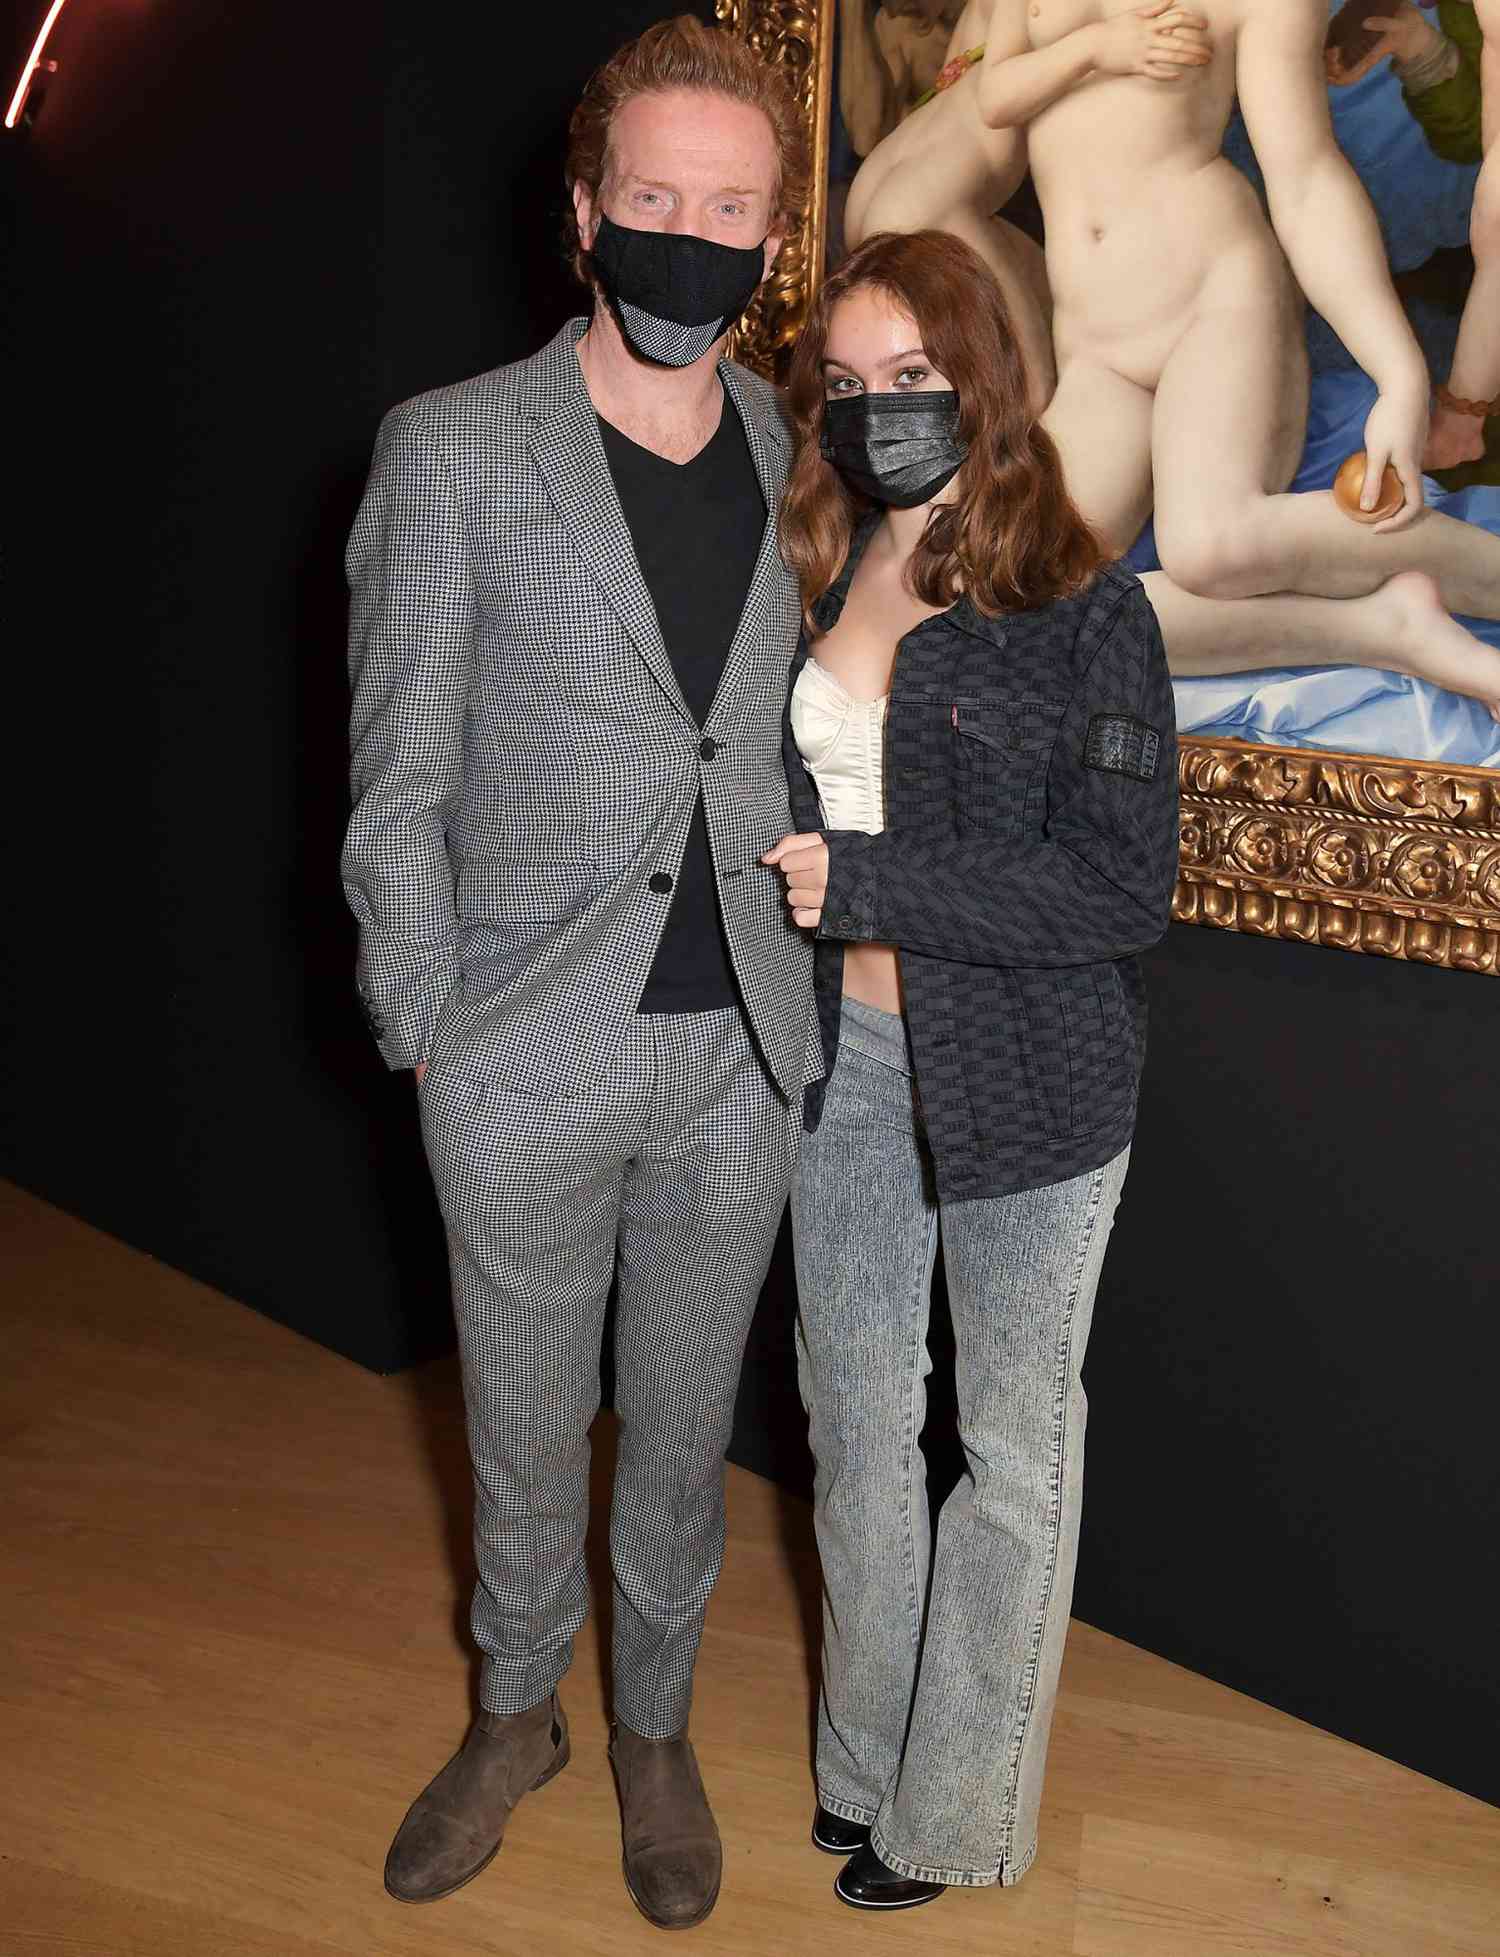 Damian Lewis and Manon McCrory-Lewis attend the private view of the newly opened 'Artemisia' & 'Sin' exhibitions at The National Gallery on October 6, 2020 in London, England